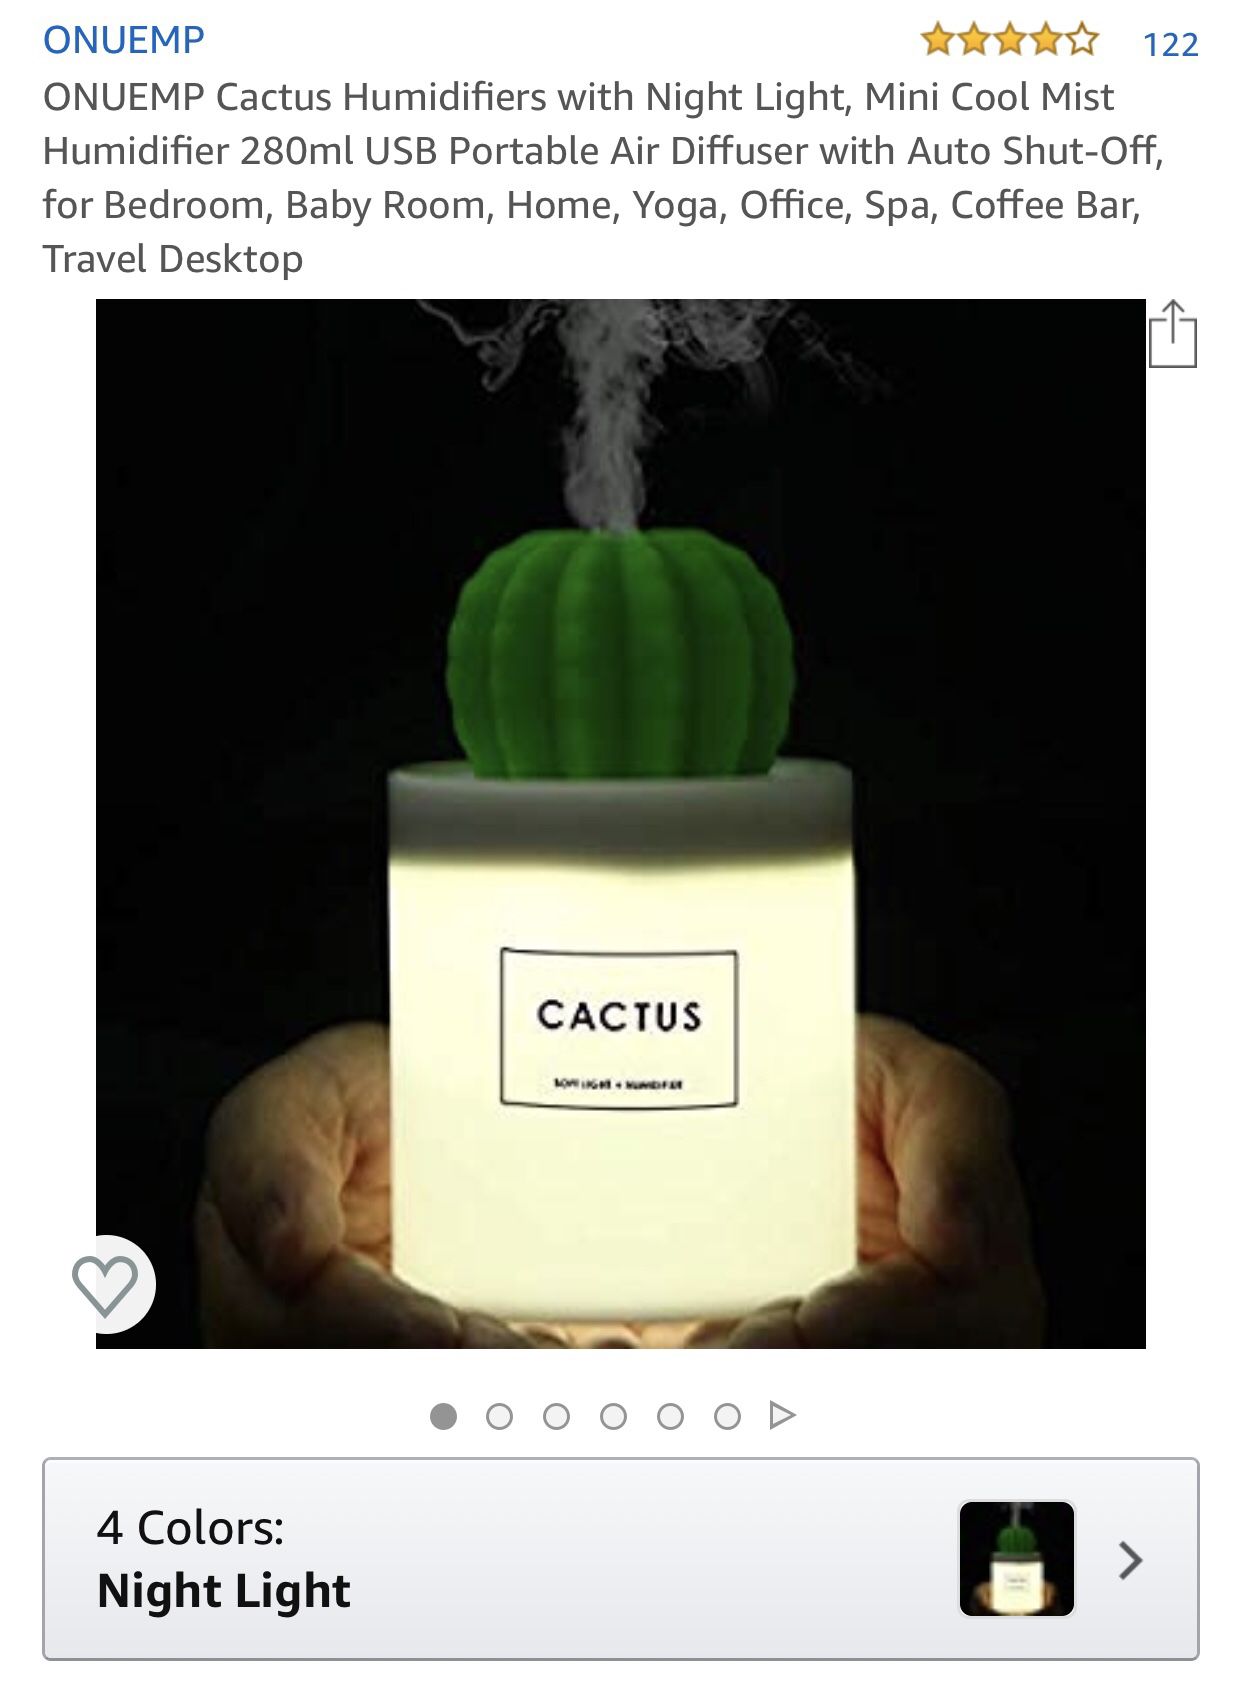 Brand new cactus humidifier with night light 280ml USB portable air diffuser